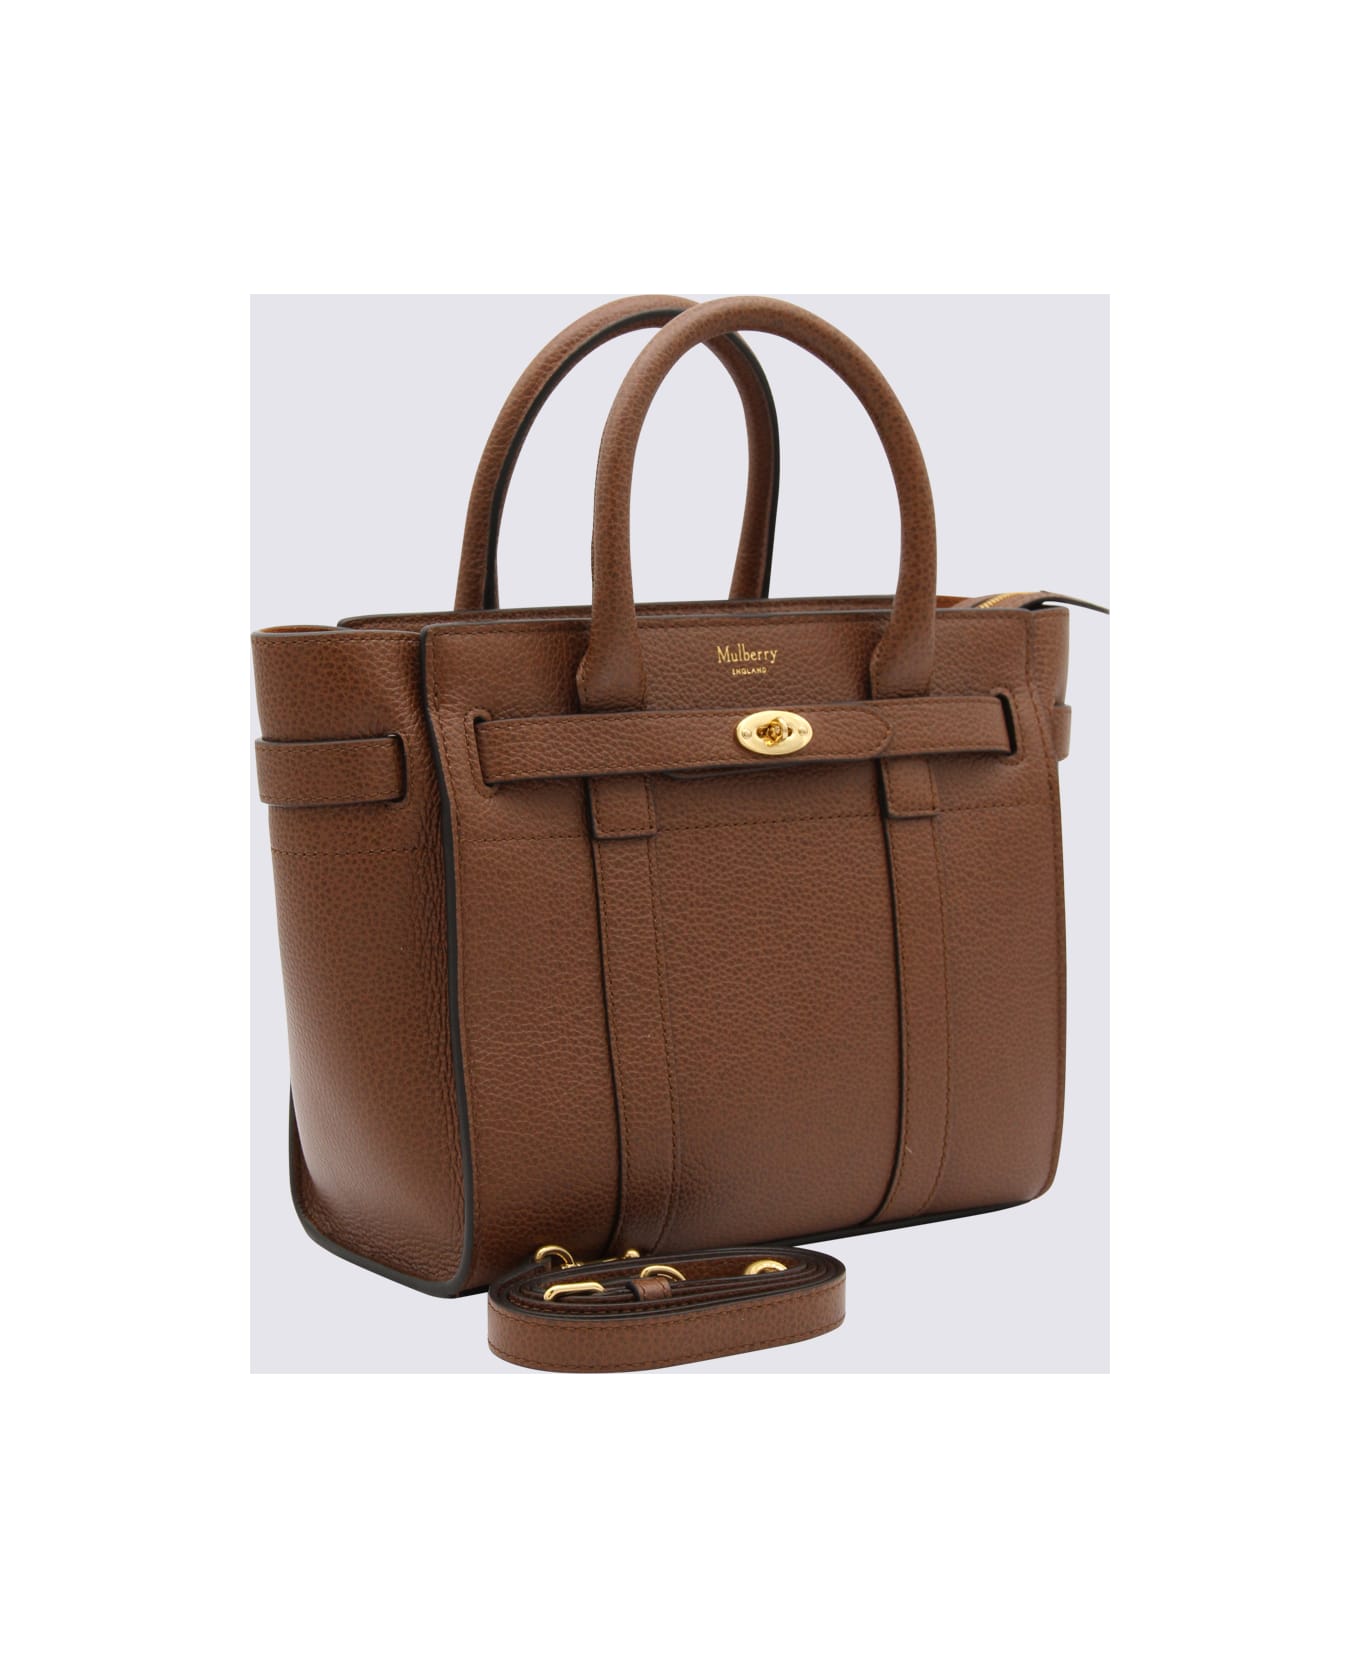 Mulberry Brown Leather Bayswater Handle Bag - OAK